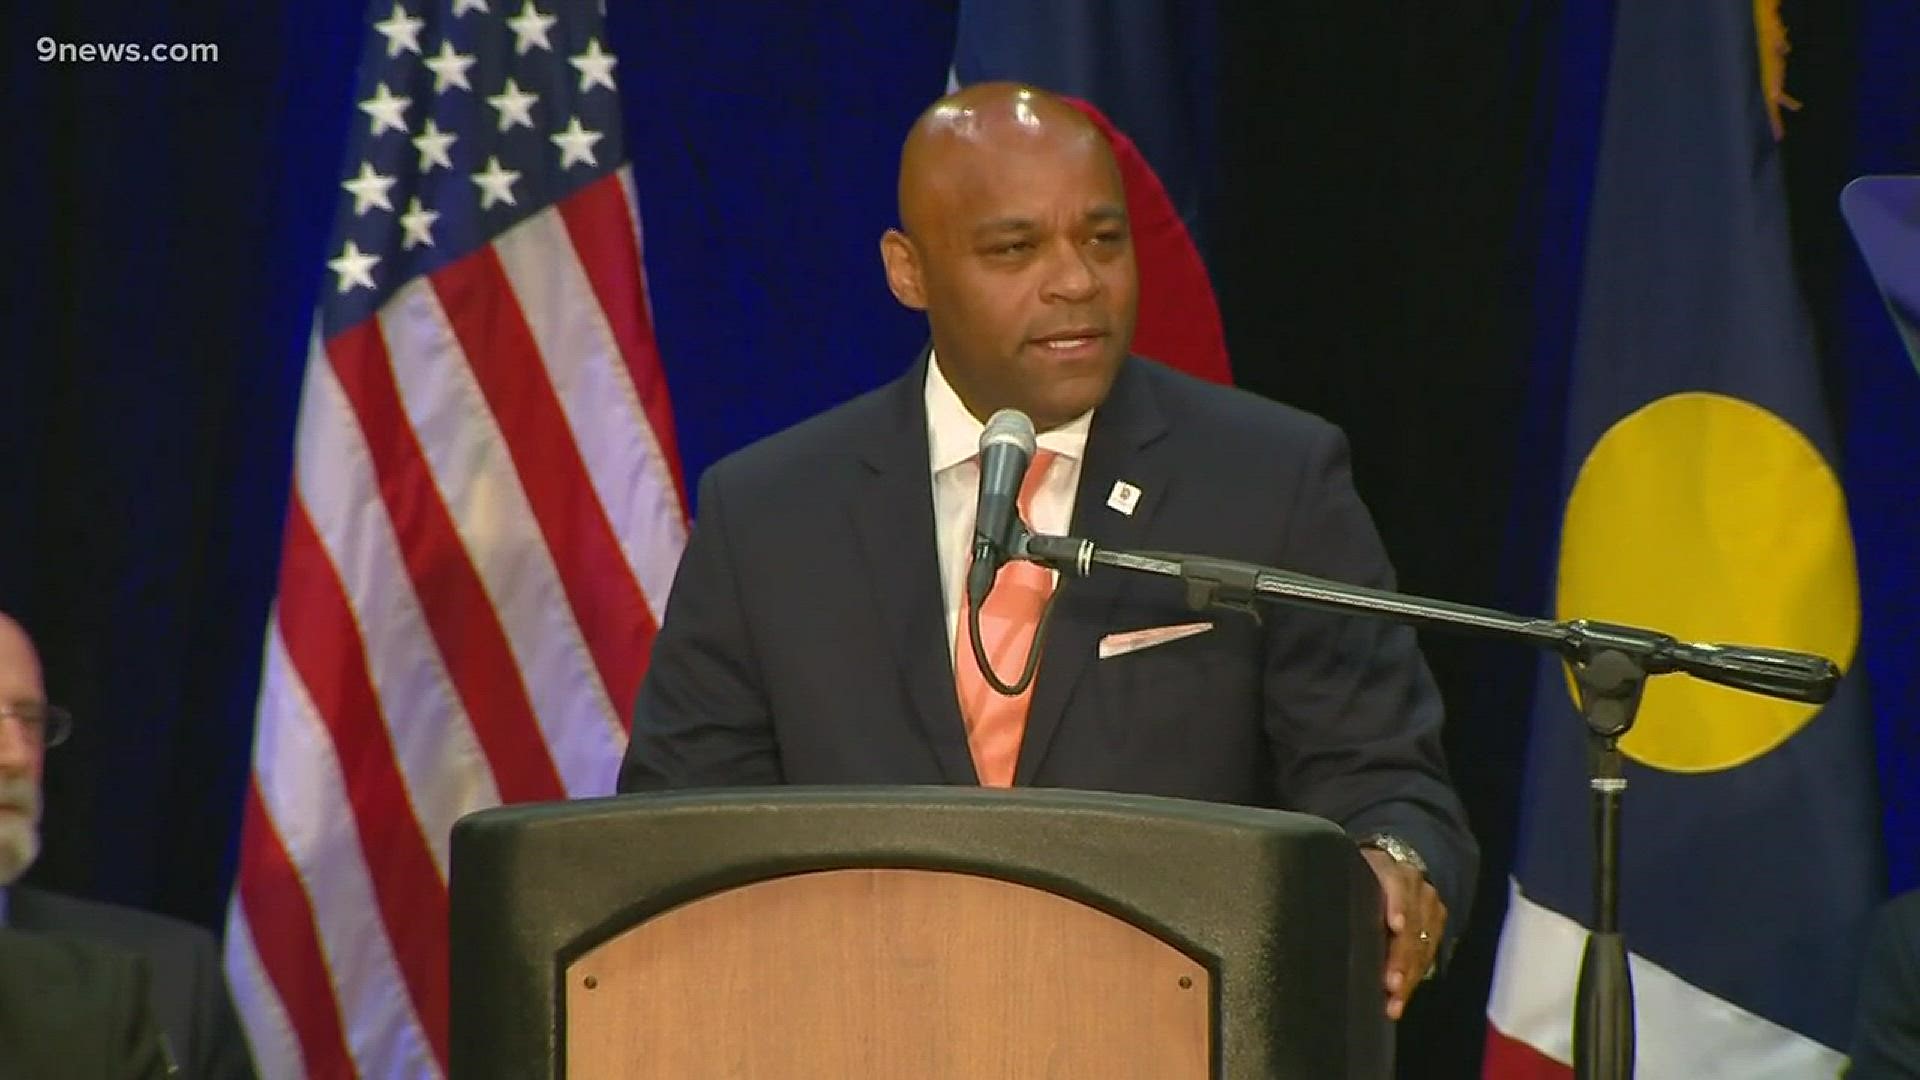 Denver Mayor Michael Hancock is considering a minimum wage increase to $15 an hour for city employees that would be phased in over several years.